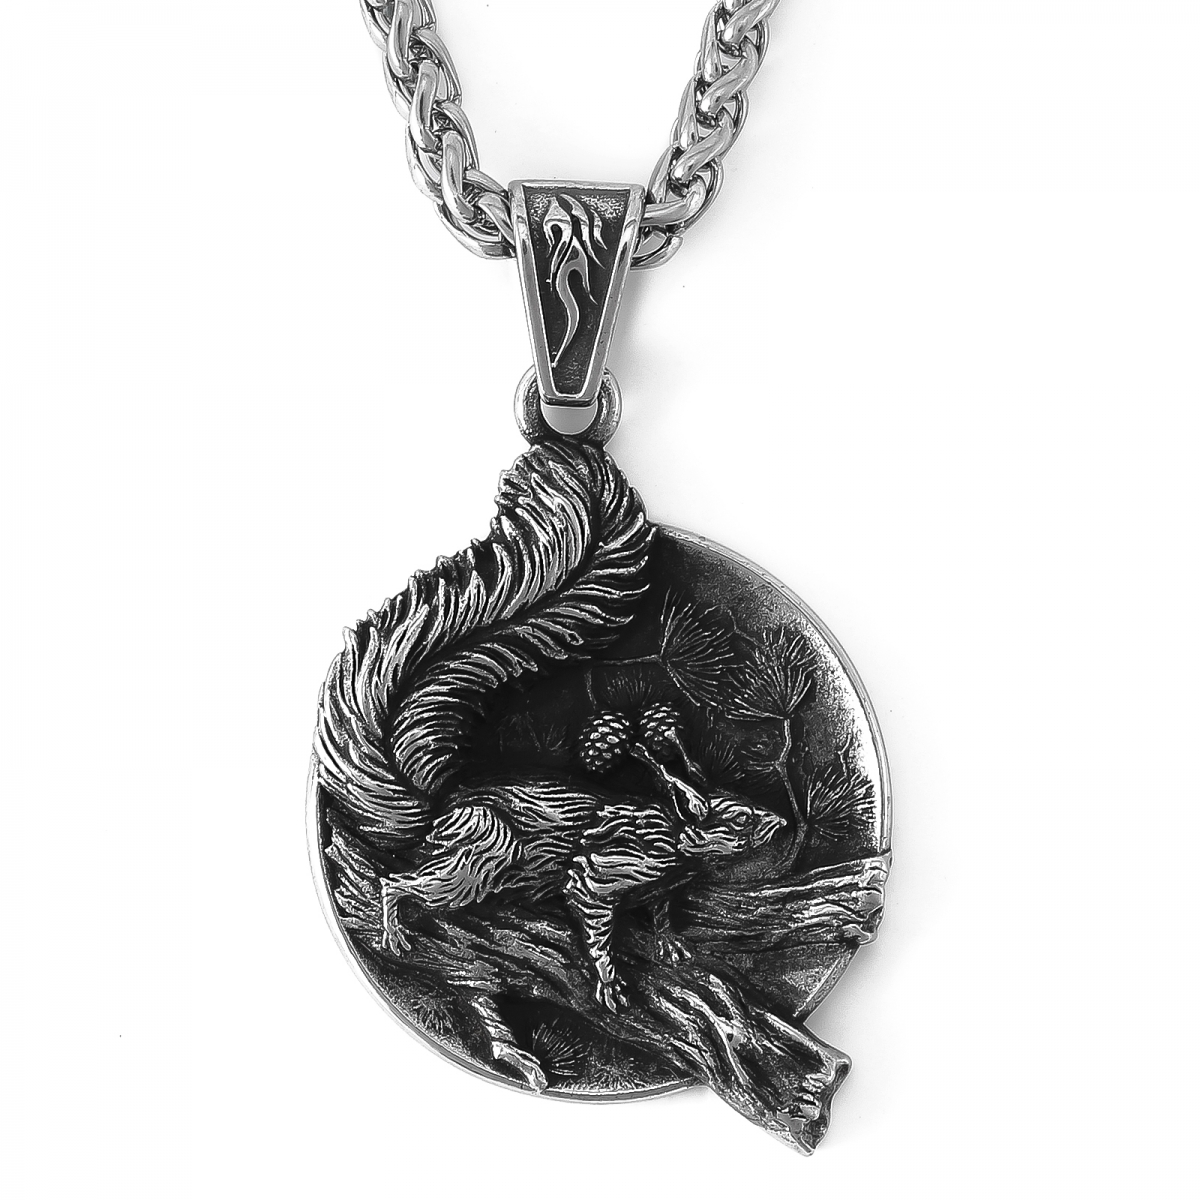 Squirrel Necklace US$3.2/PC-NORSECOLLECTION- Viking Jewelry,Viking Necklace,Viking Bracelet,Viking Rings,Viking Mugs,Viking Accessories,Viking Crafts